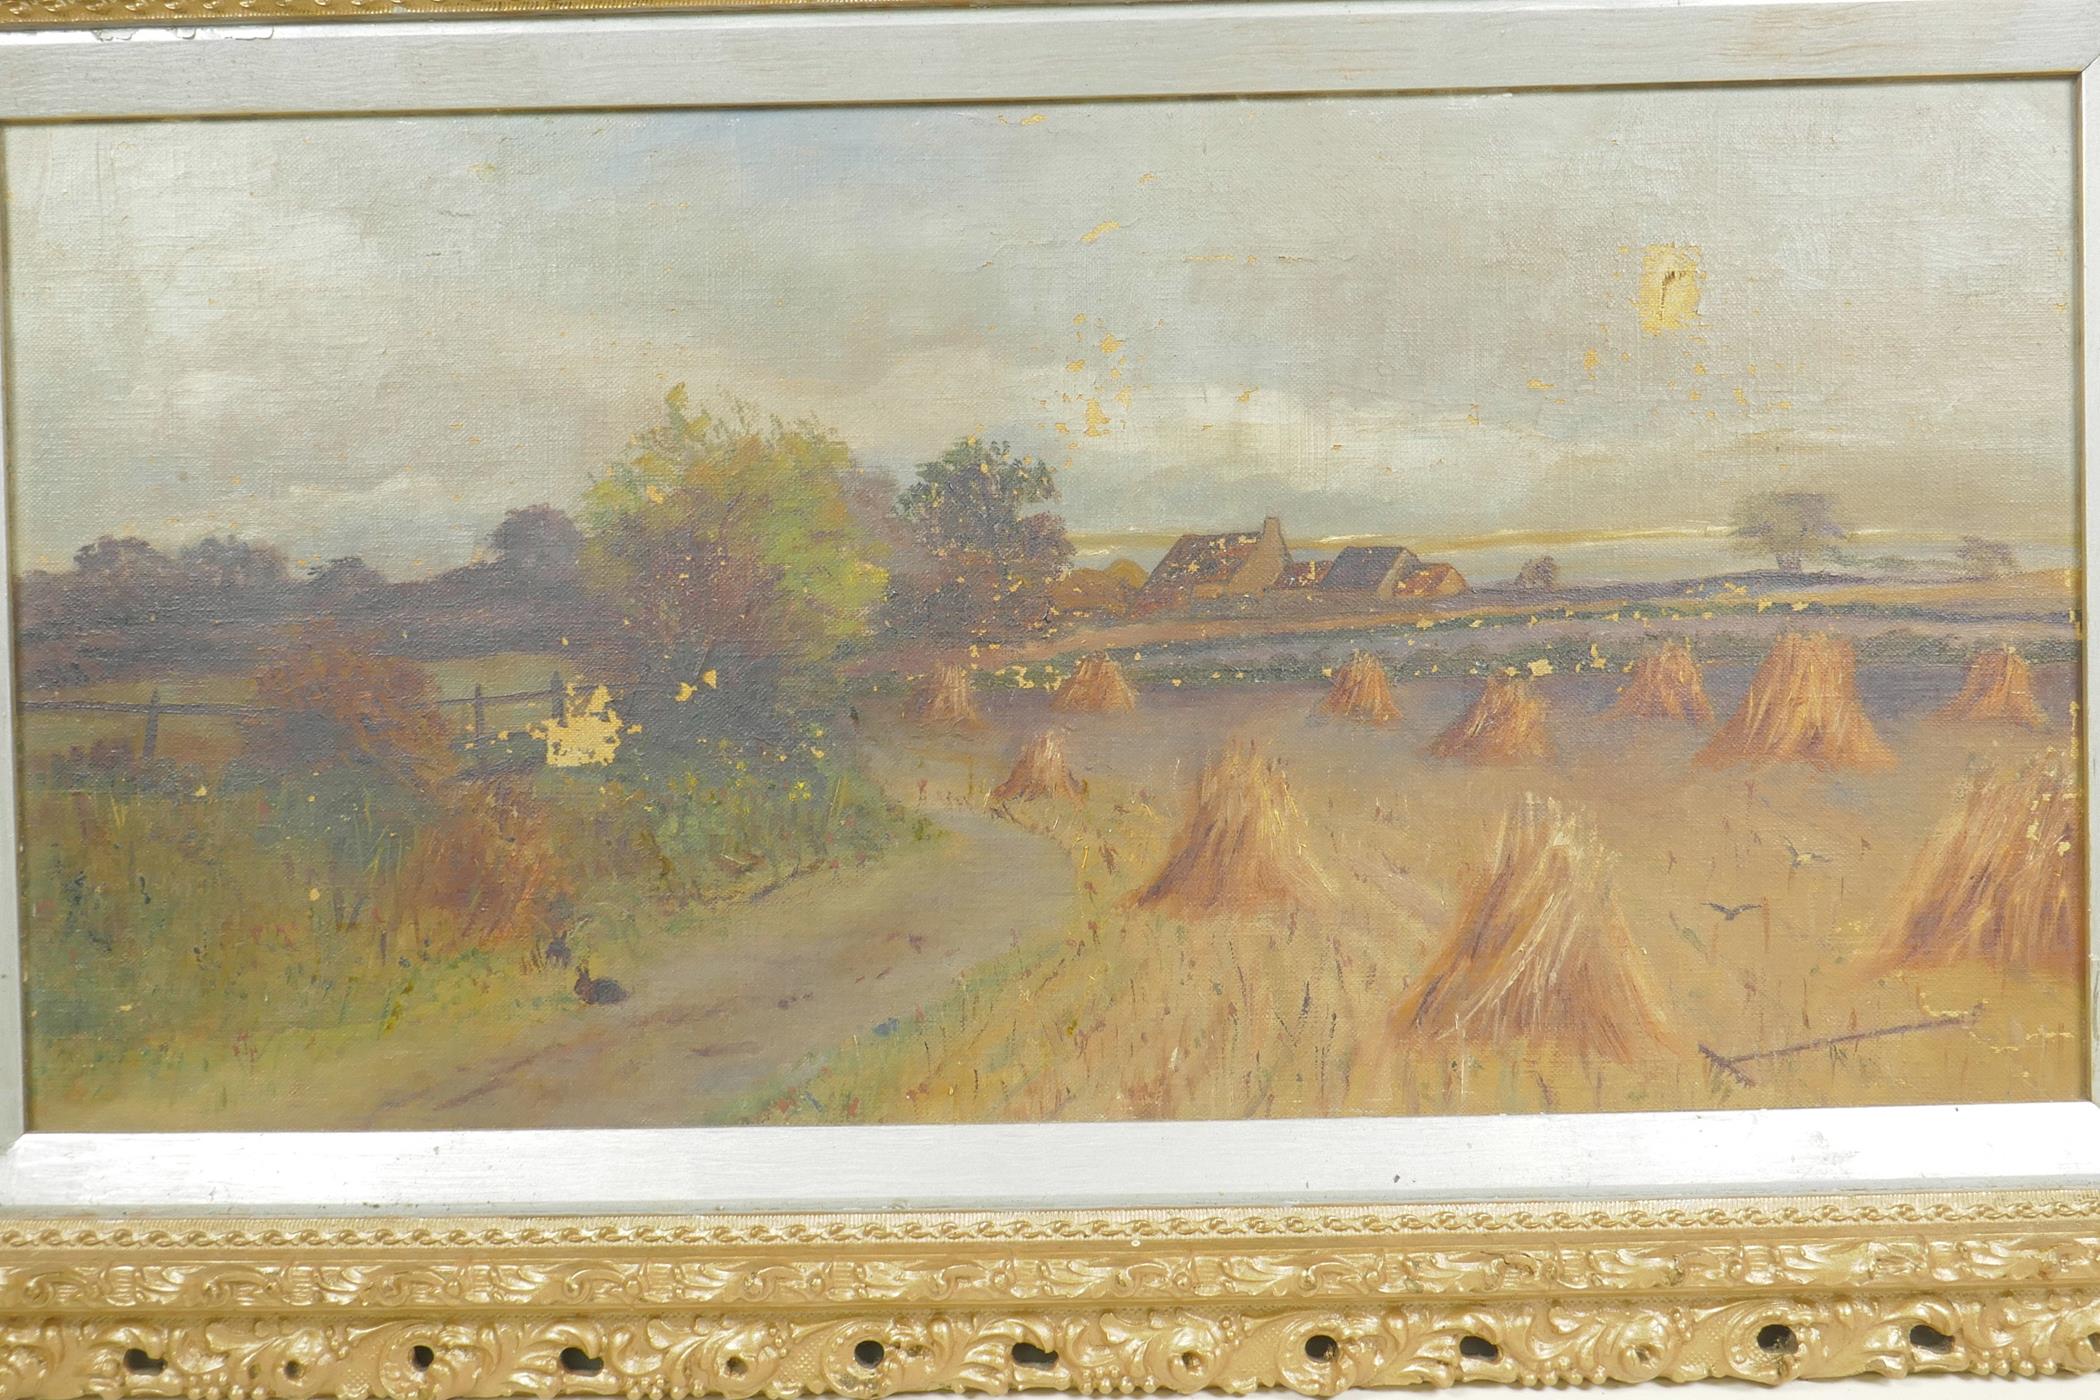 Corn stooks in a field with farm buildings beyond, oil on canvas, A/F, 20" x 10" - Image 3 of 3